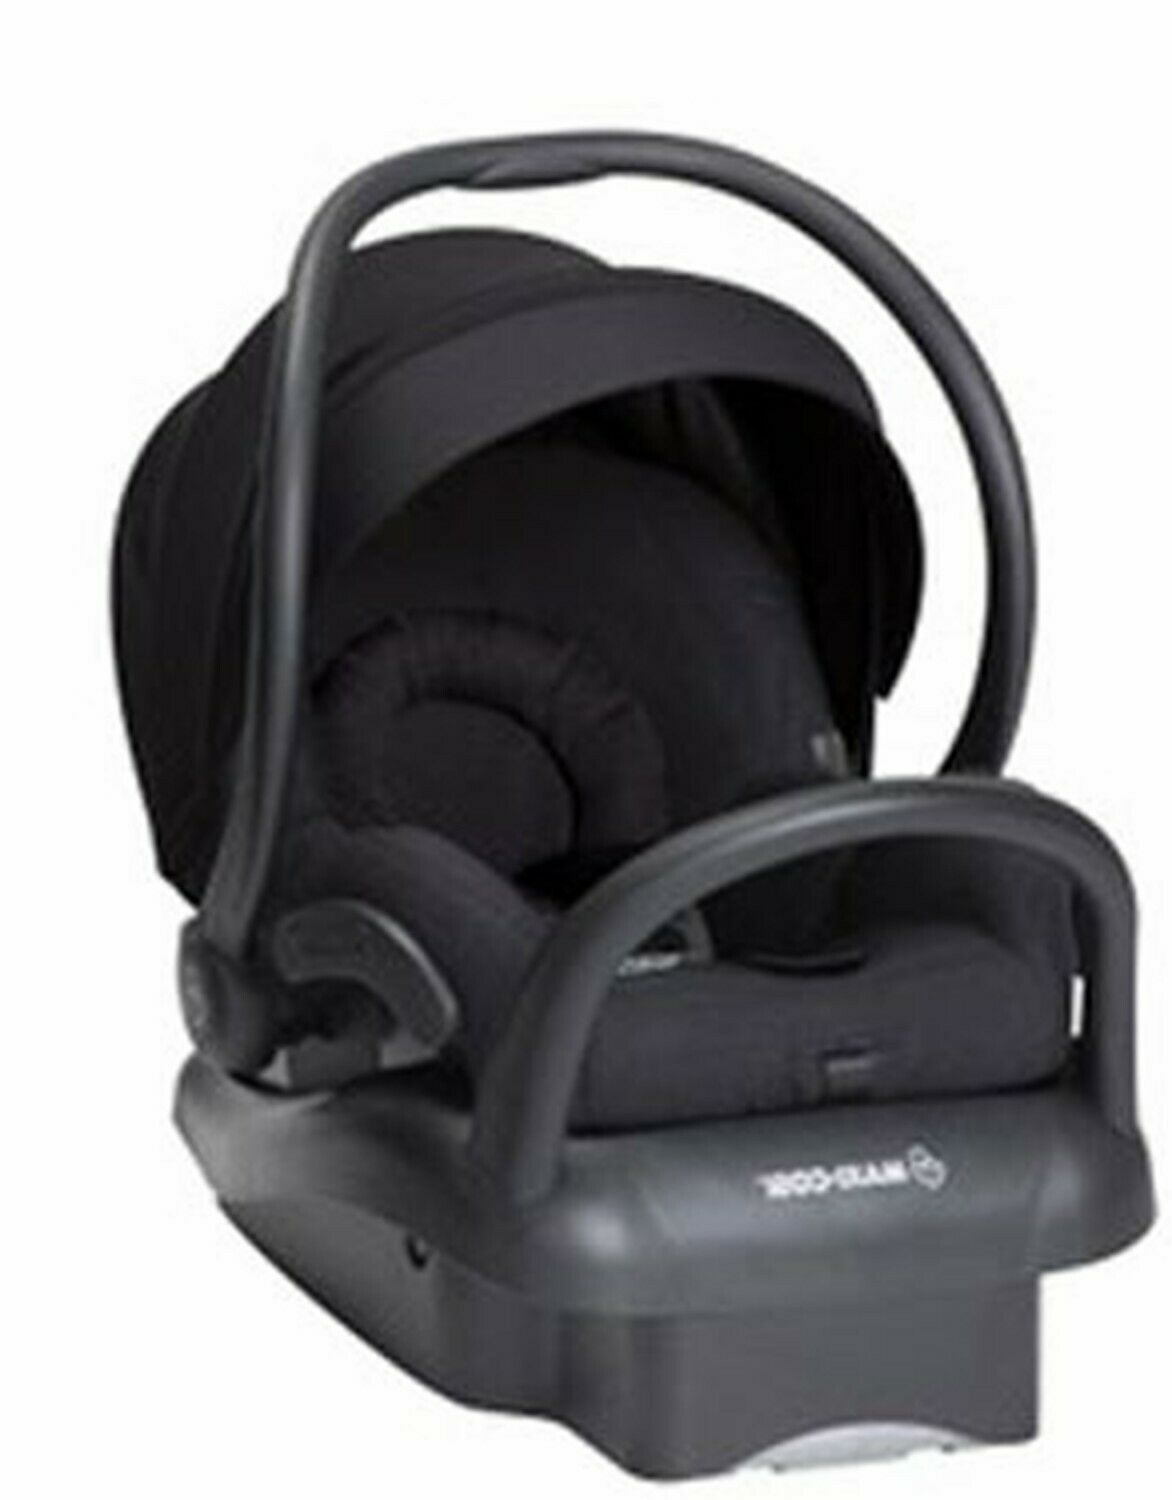 Maxi-Cosi Adorra Baby Stroller with Mico Max Car Seat Travel System Combo Black